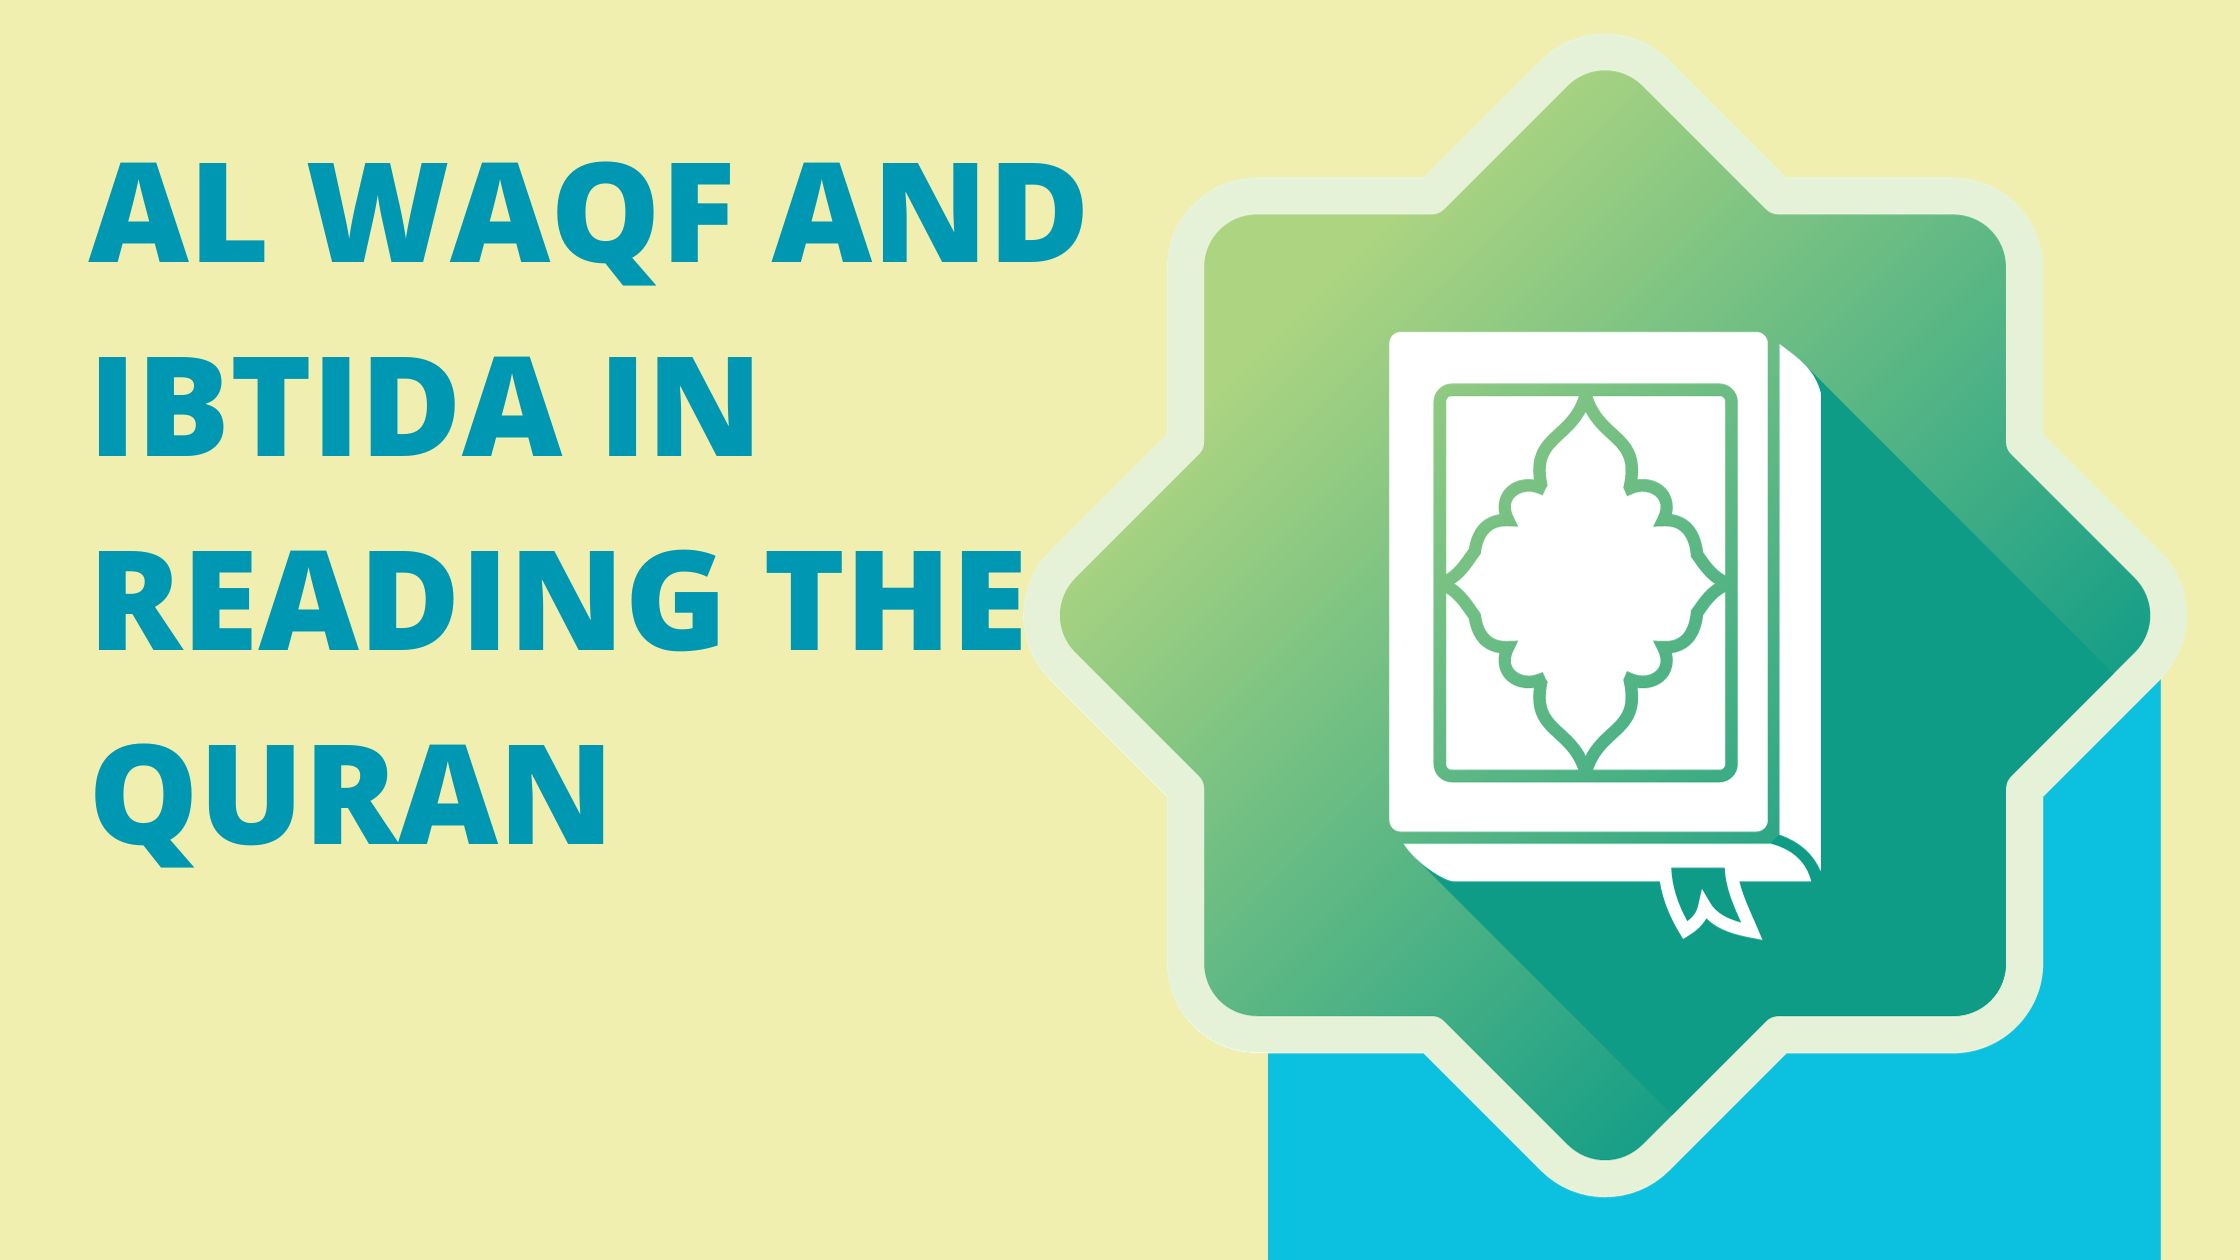 Al Waqf and Ibtida in Reading the Quran Definition, Types, Rules, and Symbols of Waqf